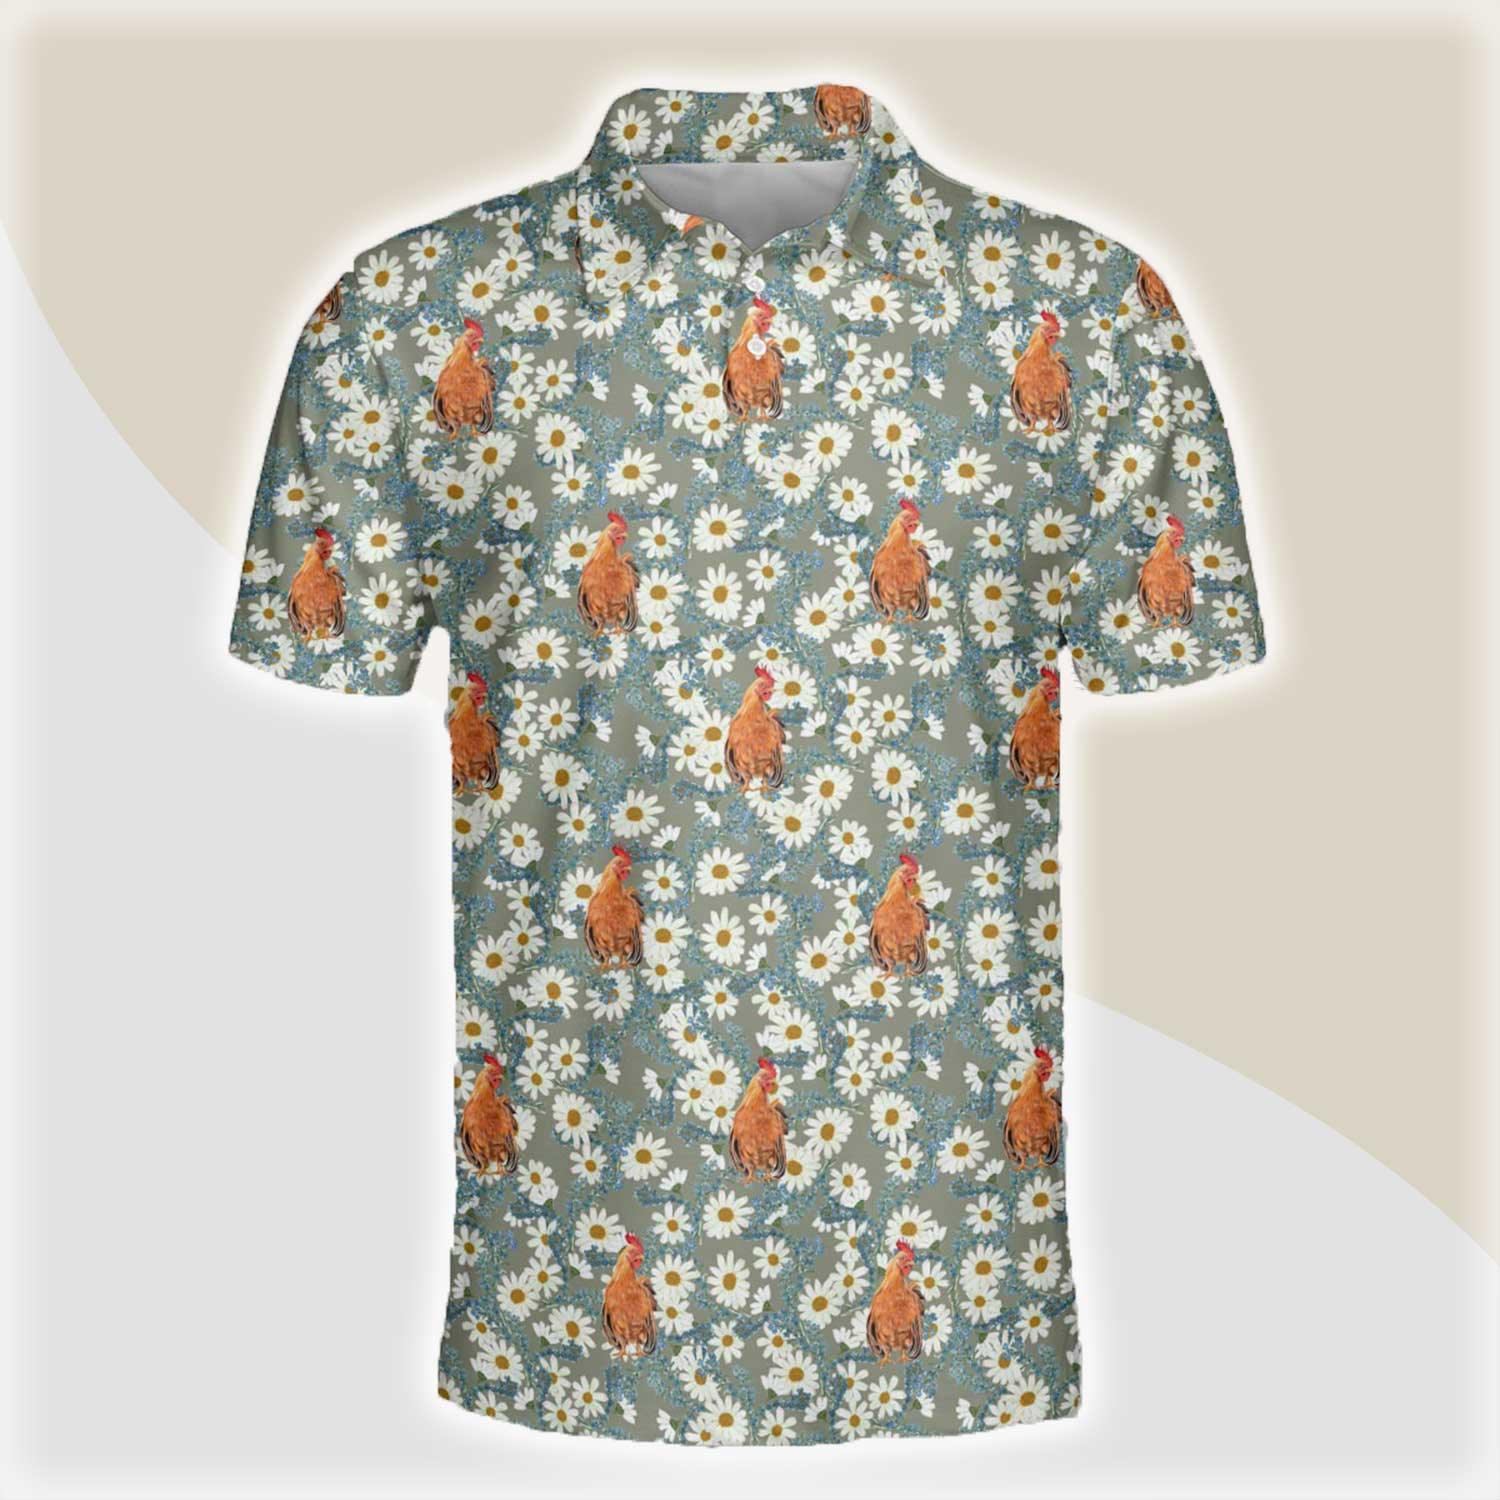 Chicken Men Polo Shirts For Summer - Chicken Camomilles Flower Grey Pattern Button Shirts For Men - Perfect Gift For Chicken Lovers, Animal Lovers - Amzanimalsgift